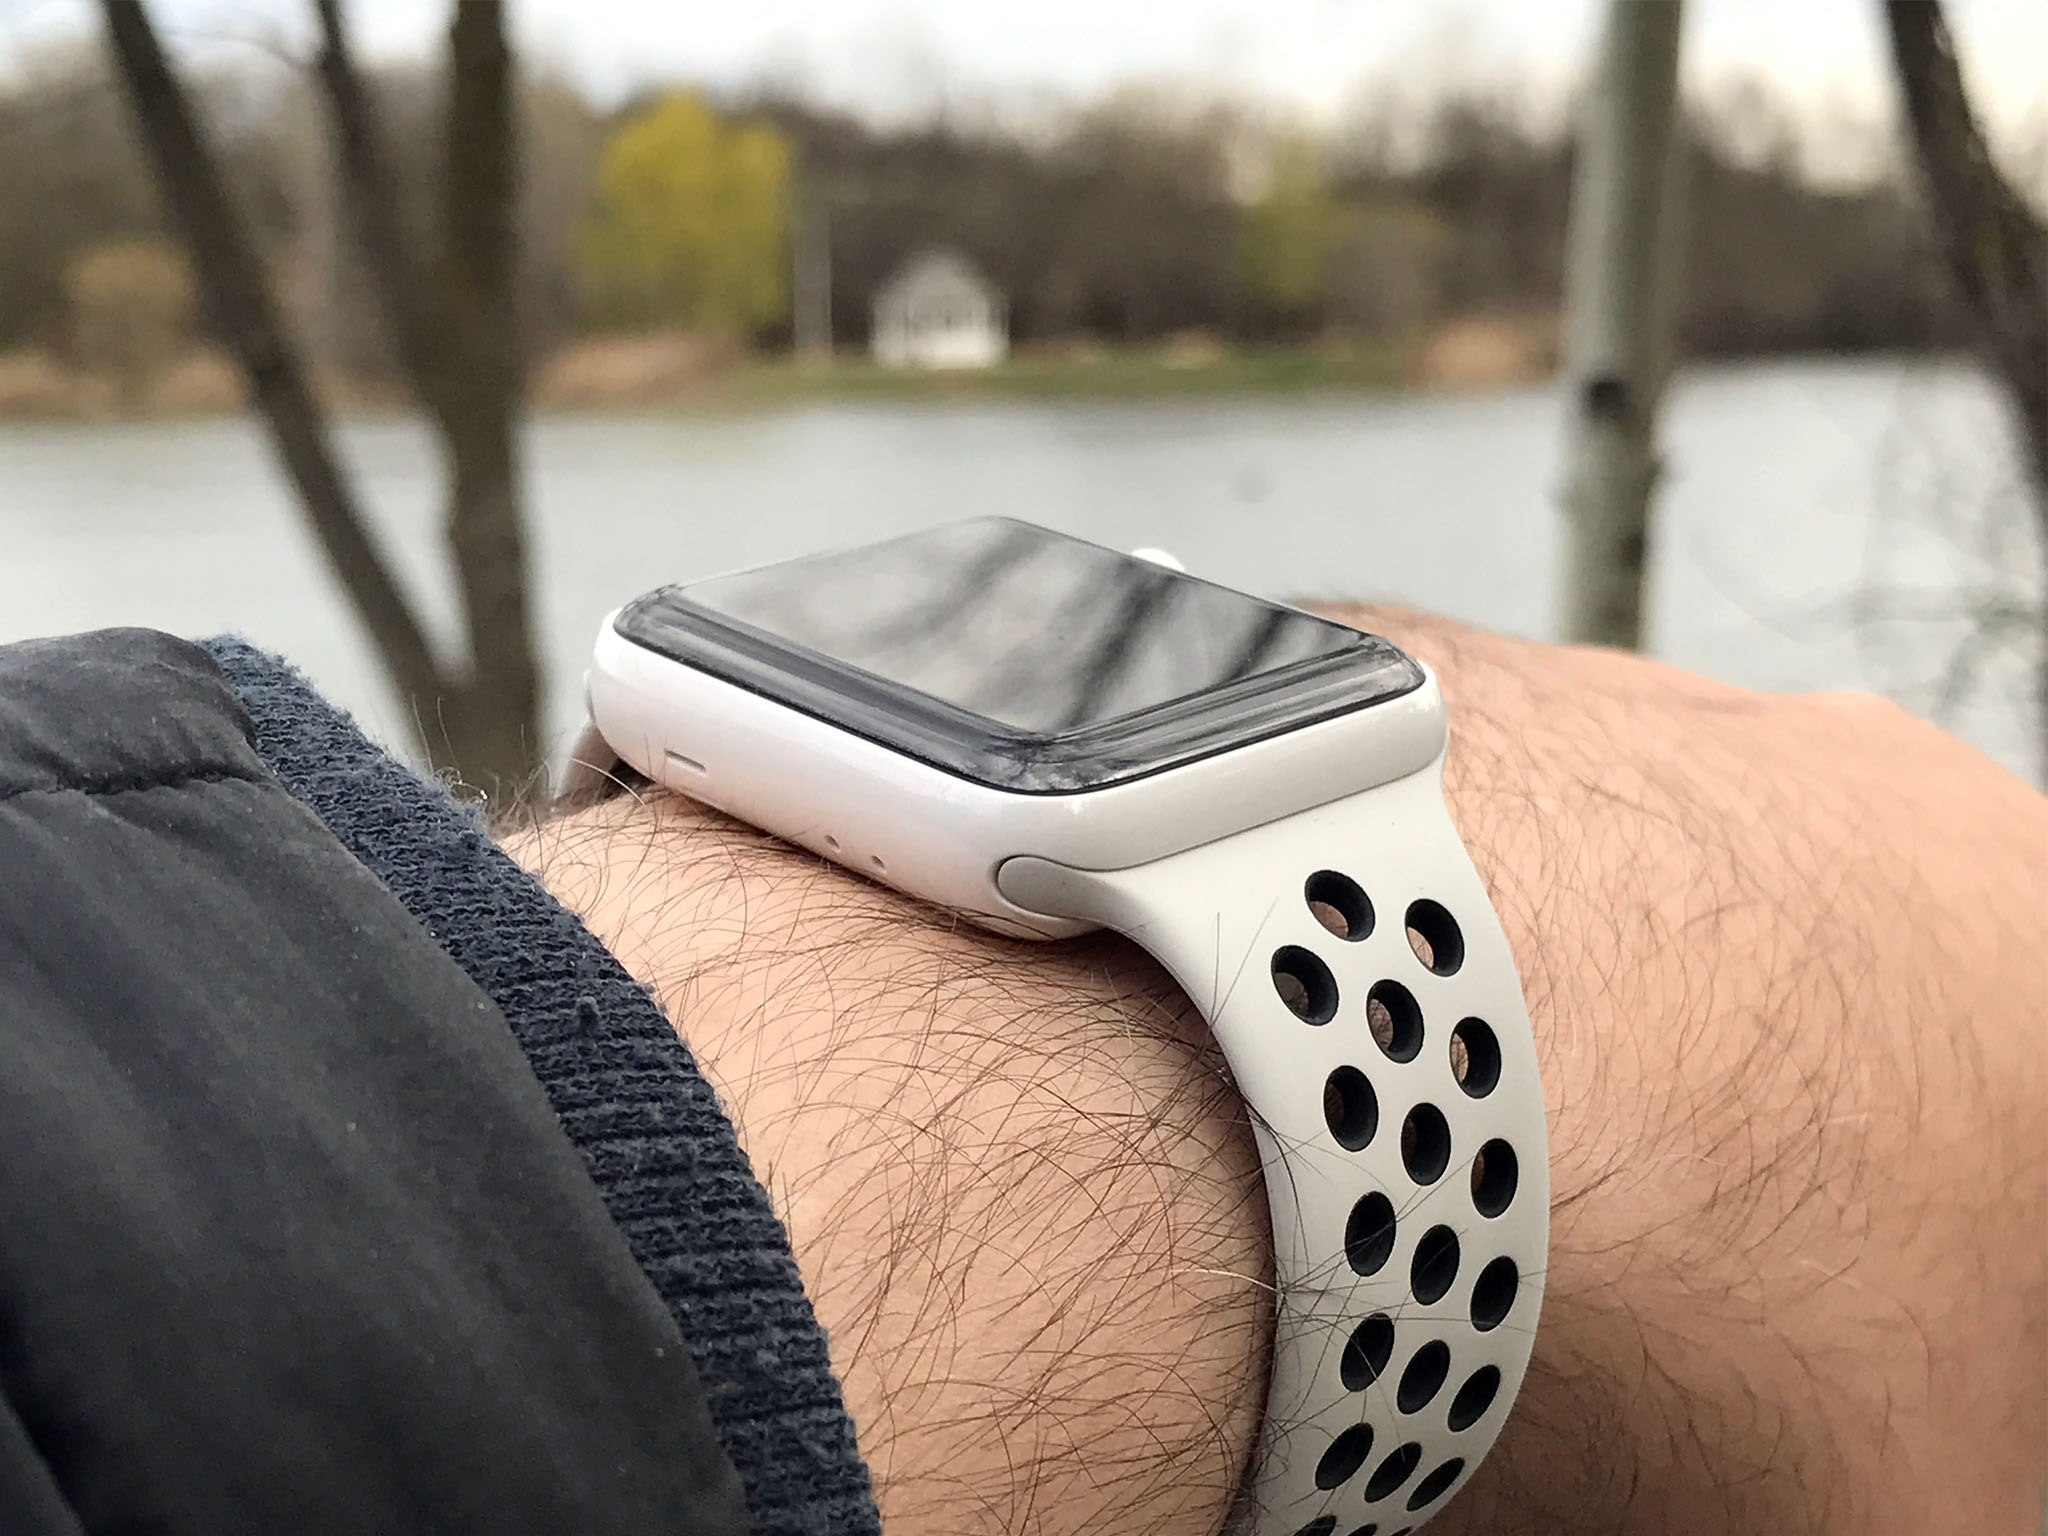 Apple Watch NikeLab in pictures | iMore